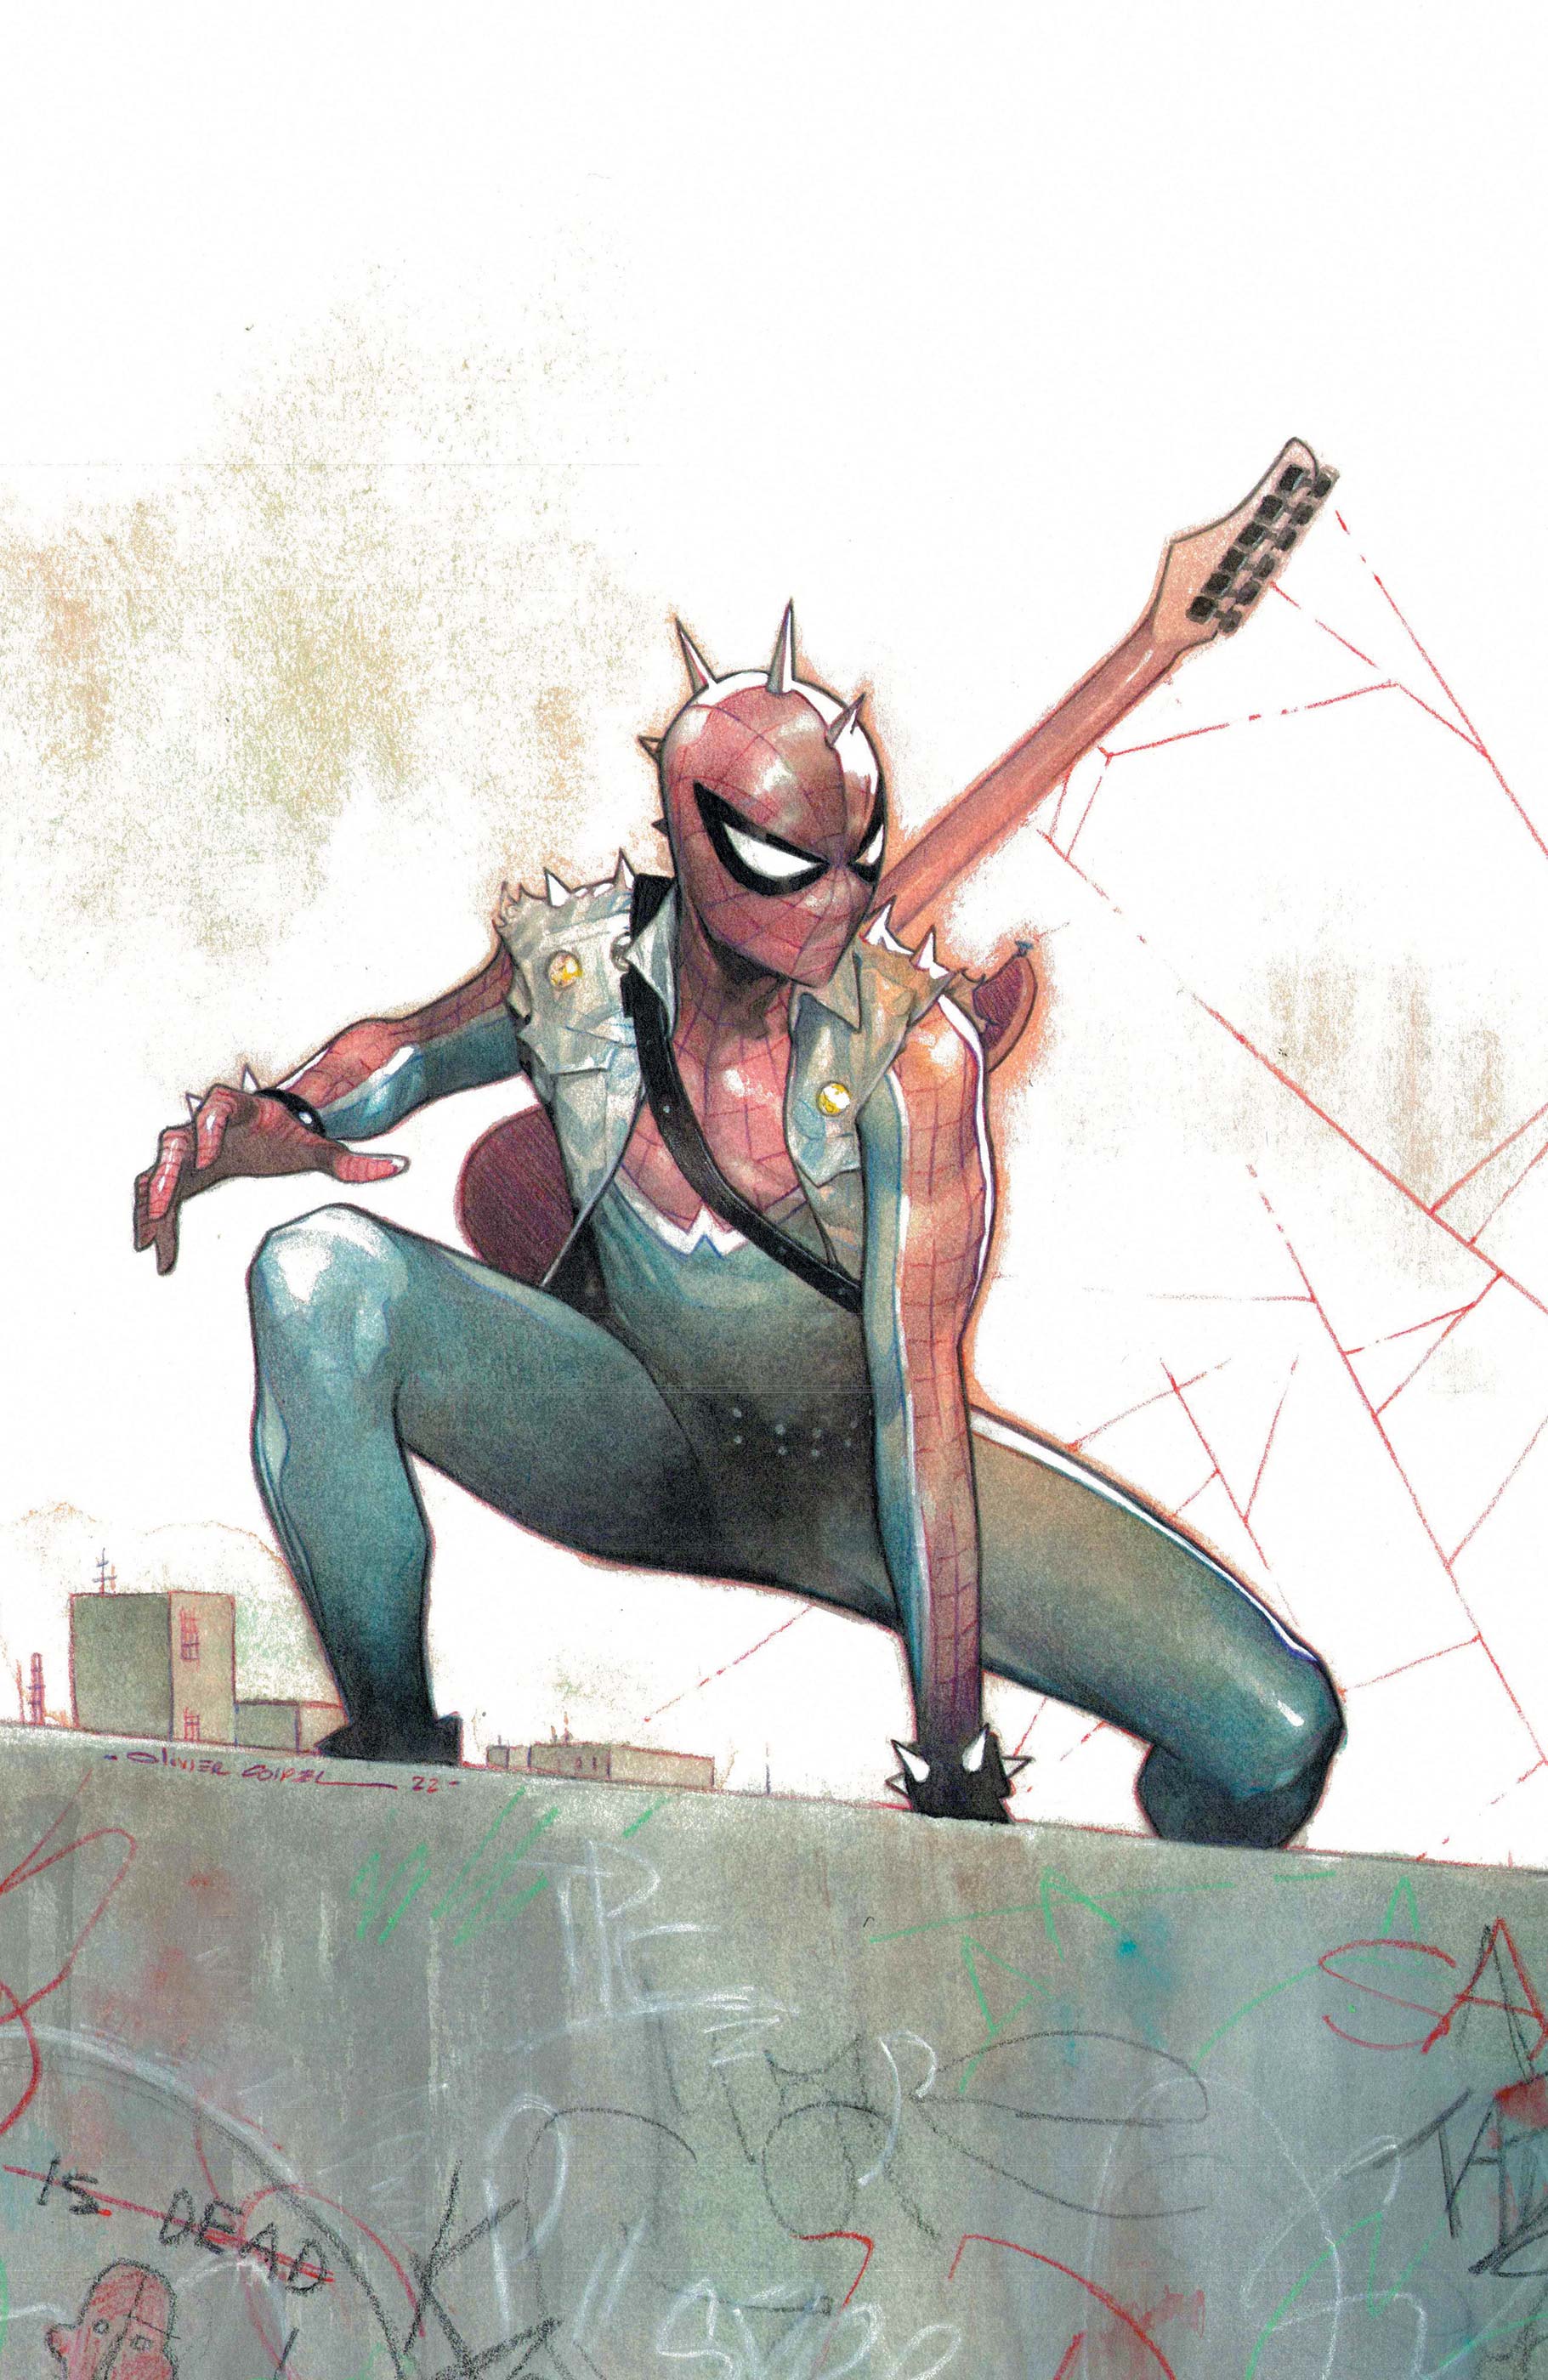 Spider-Punk: Arms Race (2024) #1 (Variant)